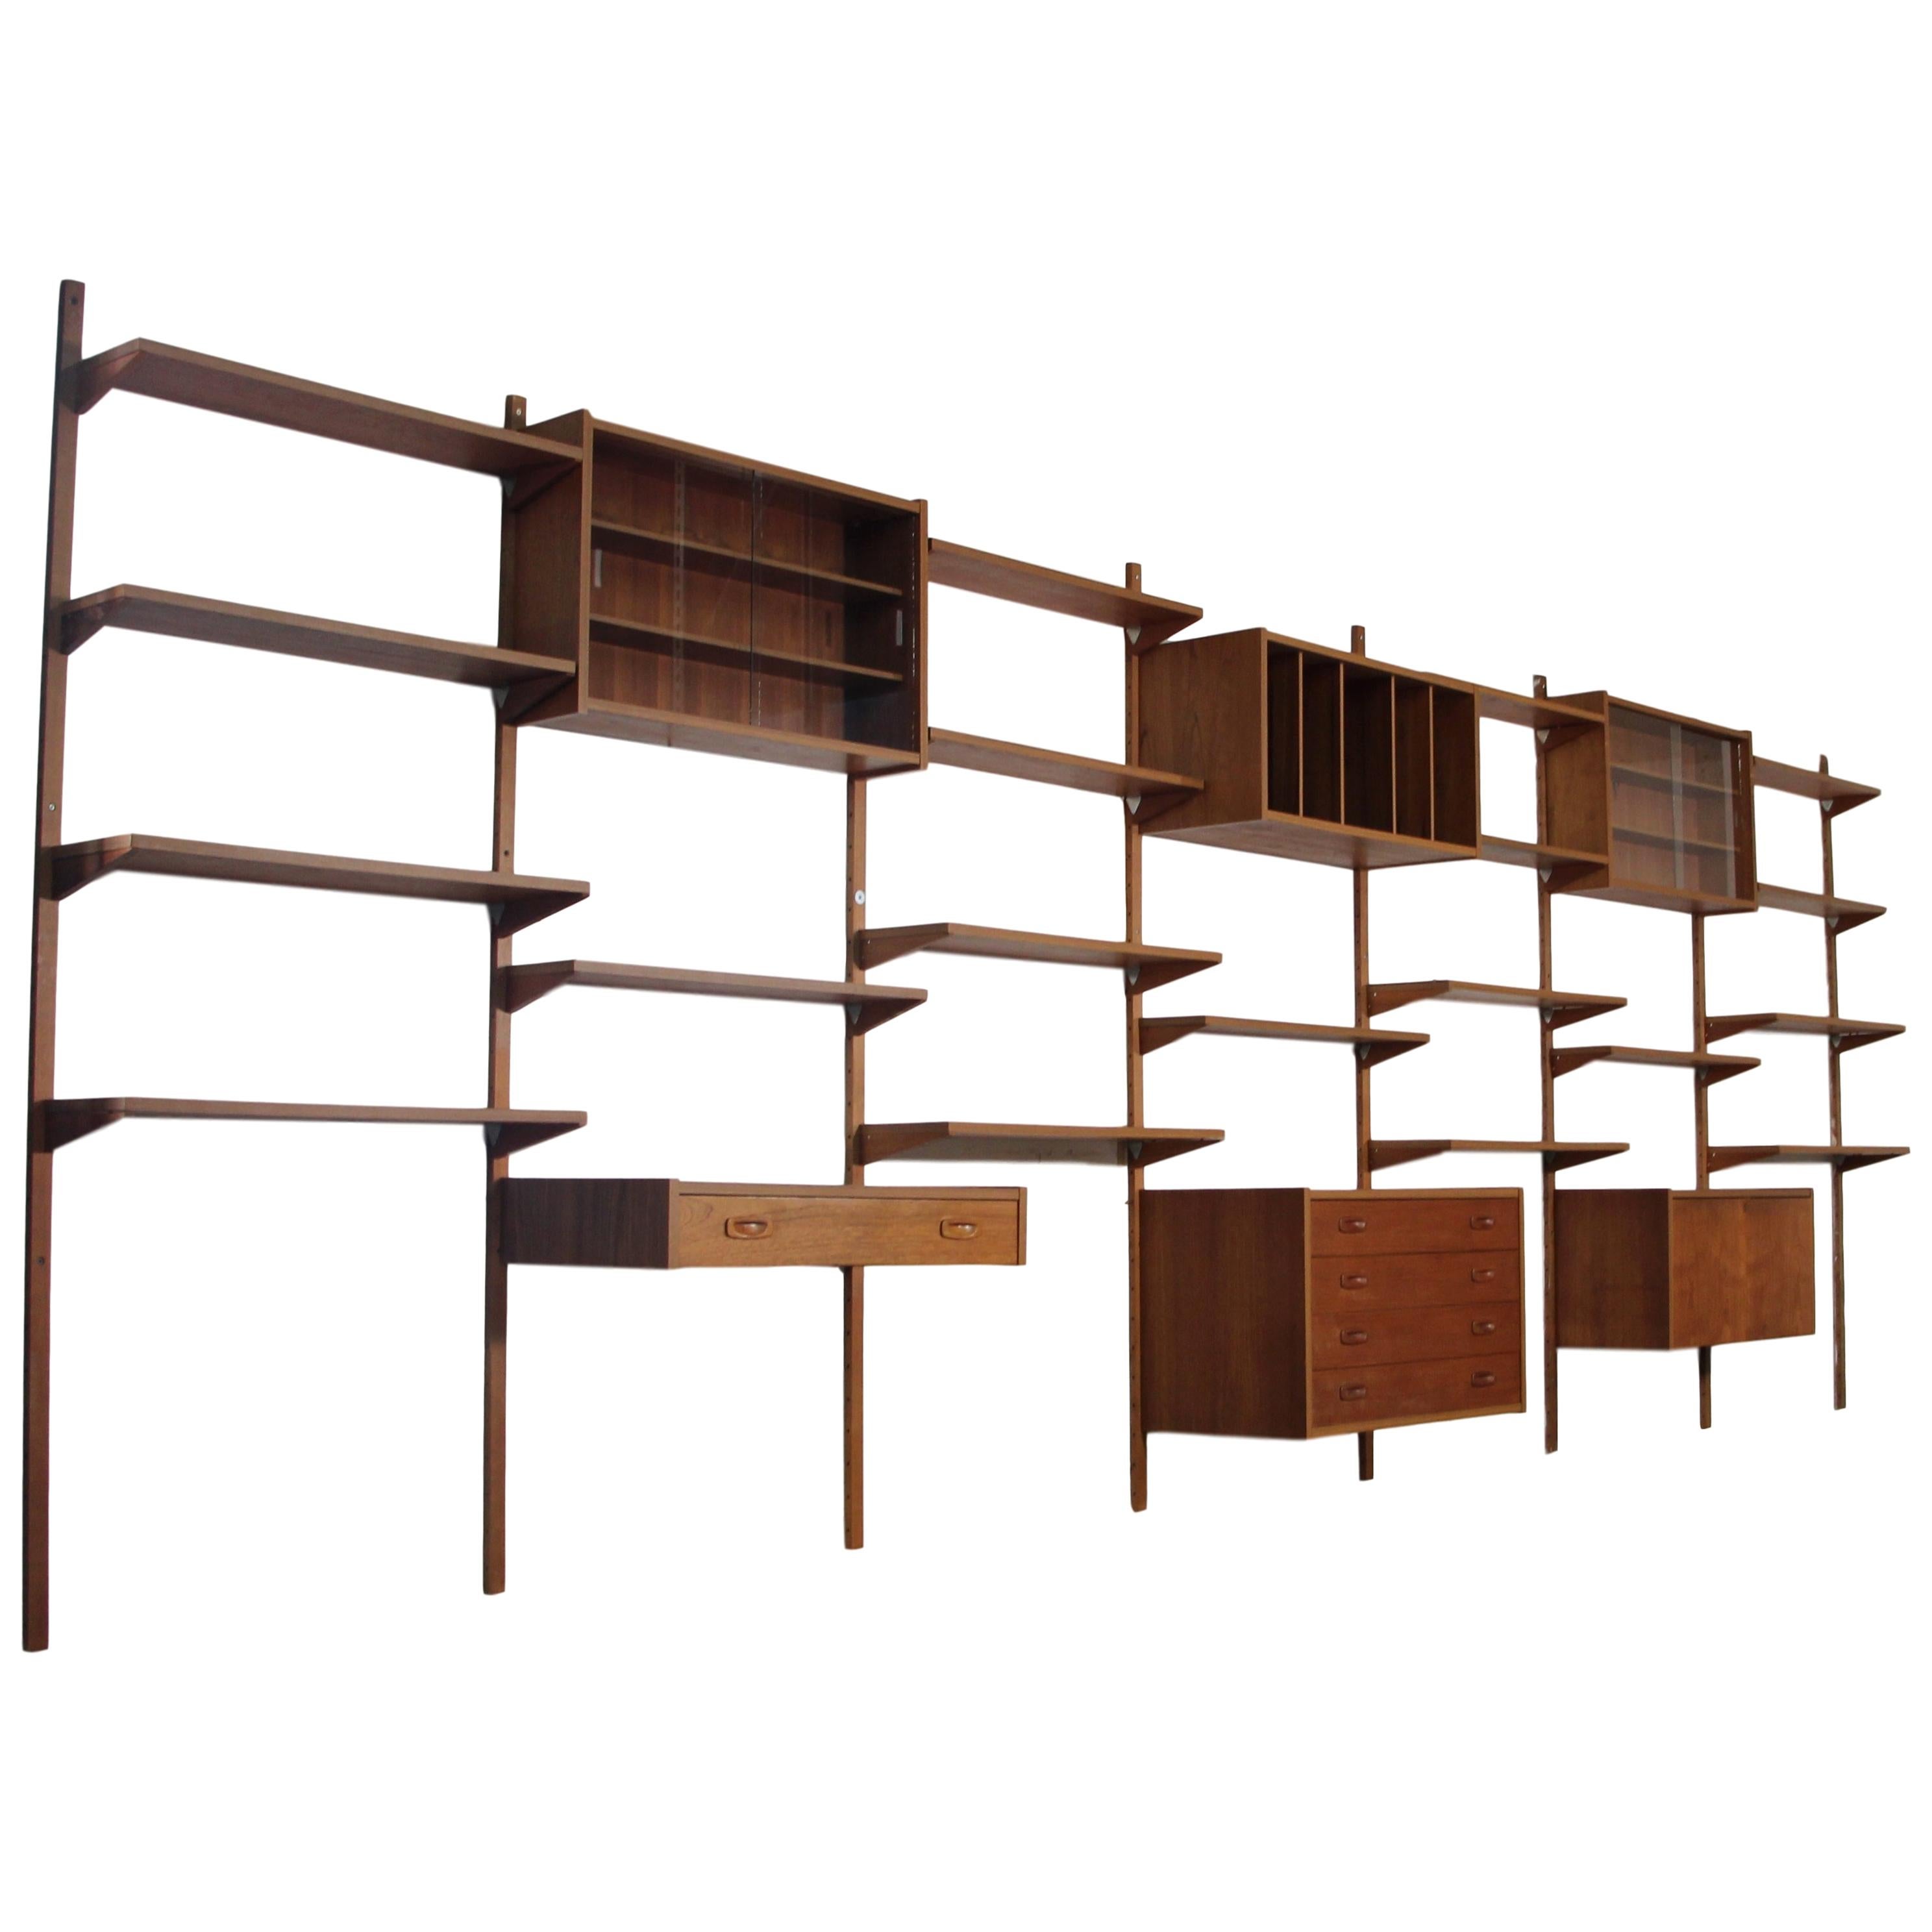 Midcentury Danish 7 Bay Teak Shelving Unit By PS Systems